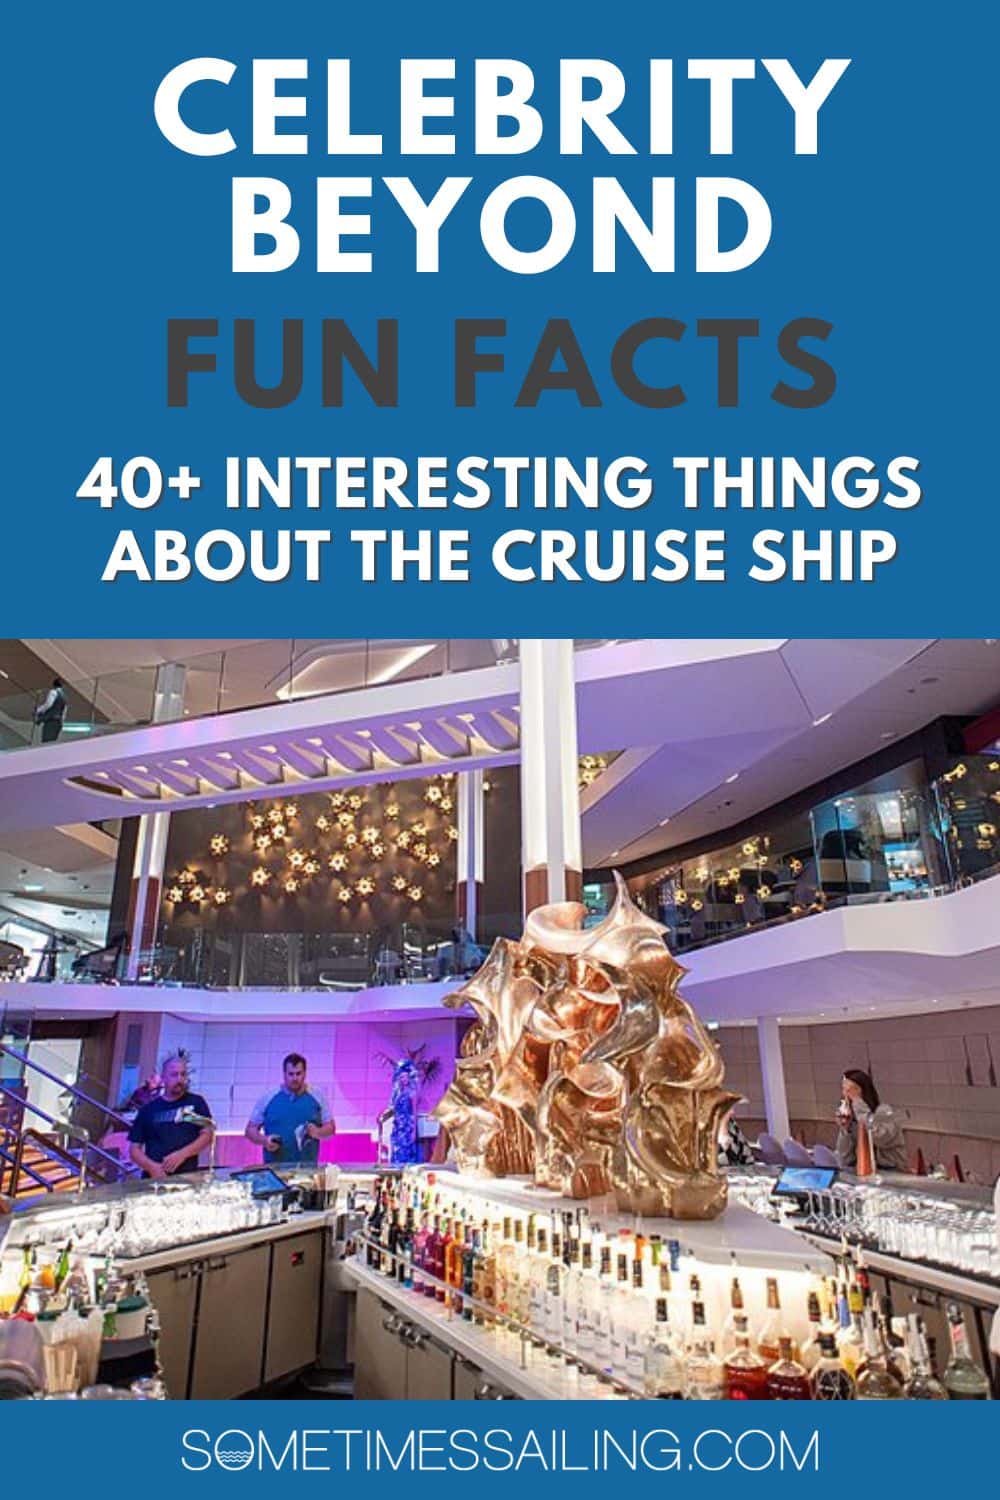 Celebrity Beyond fun facts: 40+ interesting things about the cruise ship with a picture of the Martini Bar and its central gold sculpture.